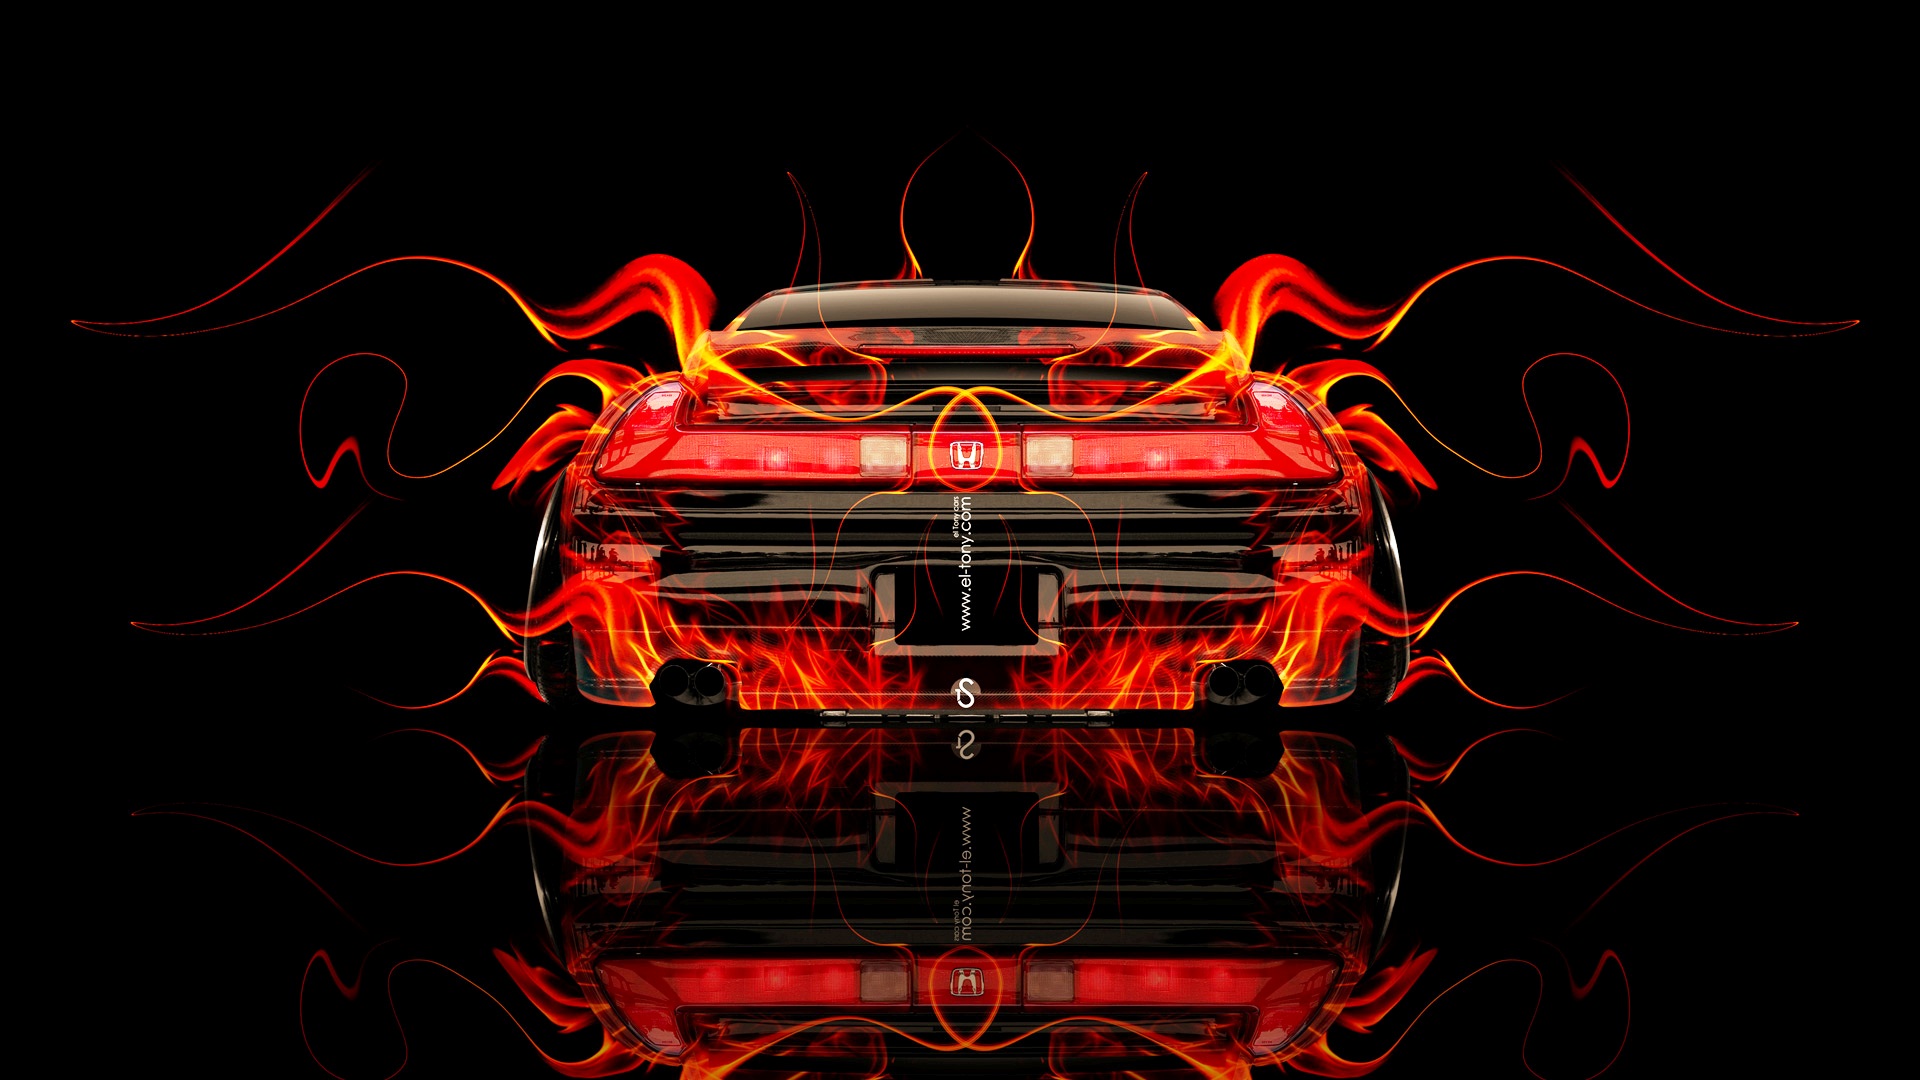 Design Talent Showcase Tony.com Brings Sensual Elements Fire And Water To YOUR Car Wallpaper 13